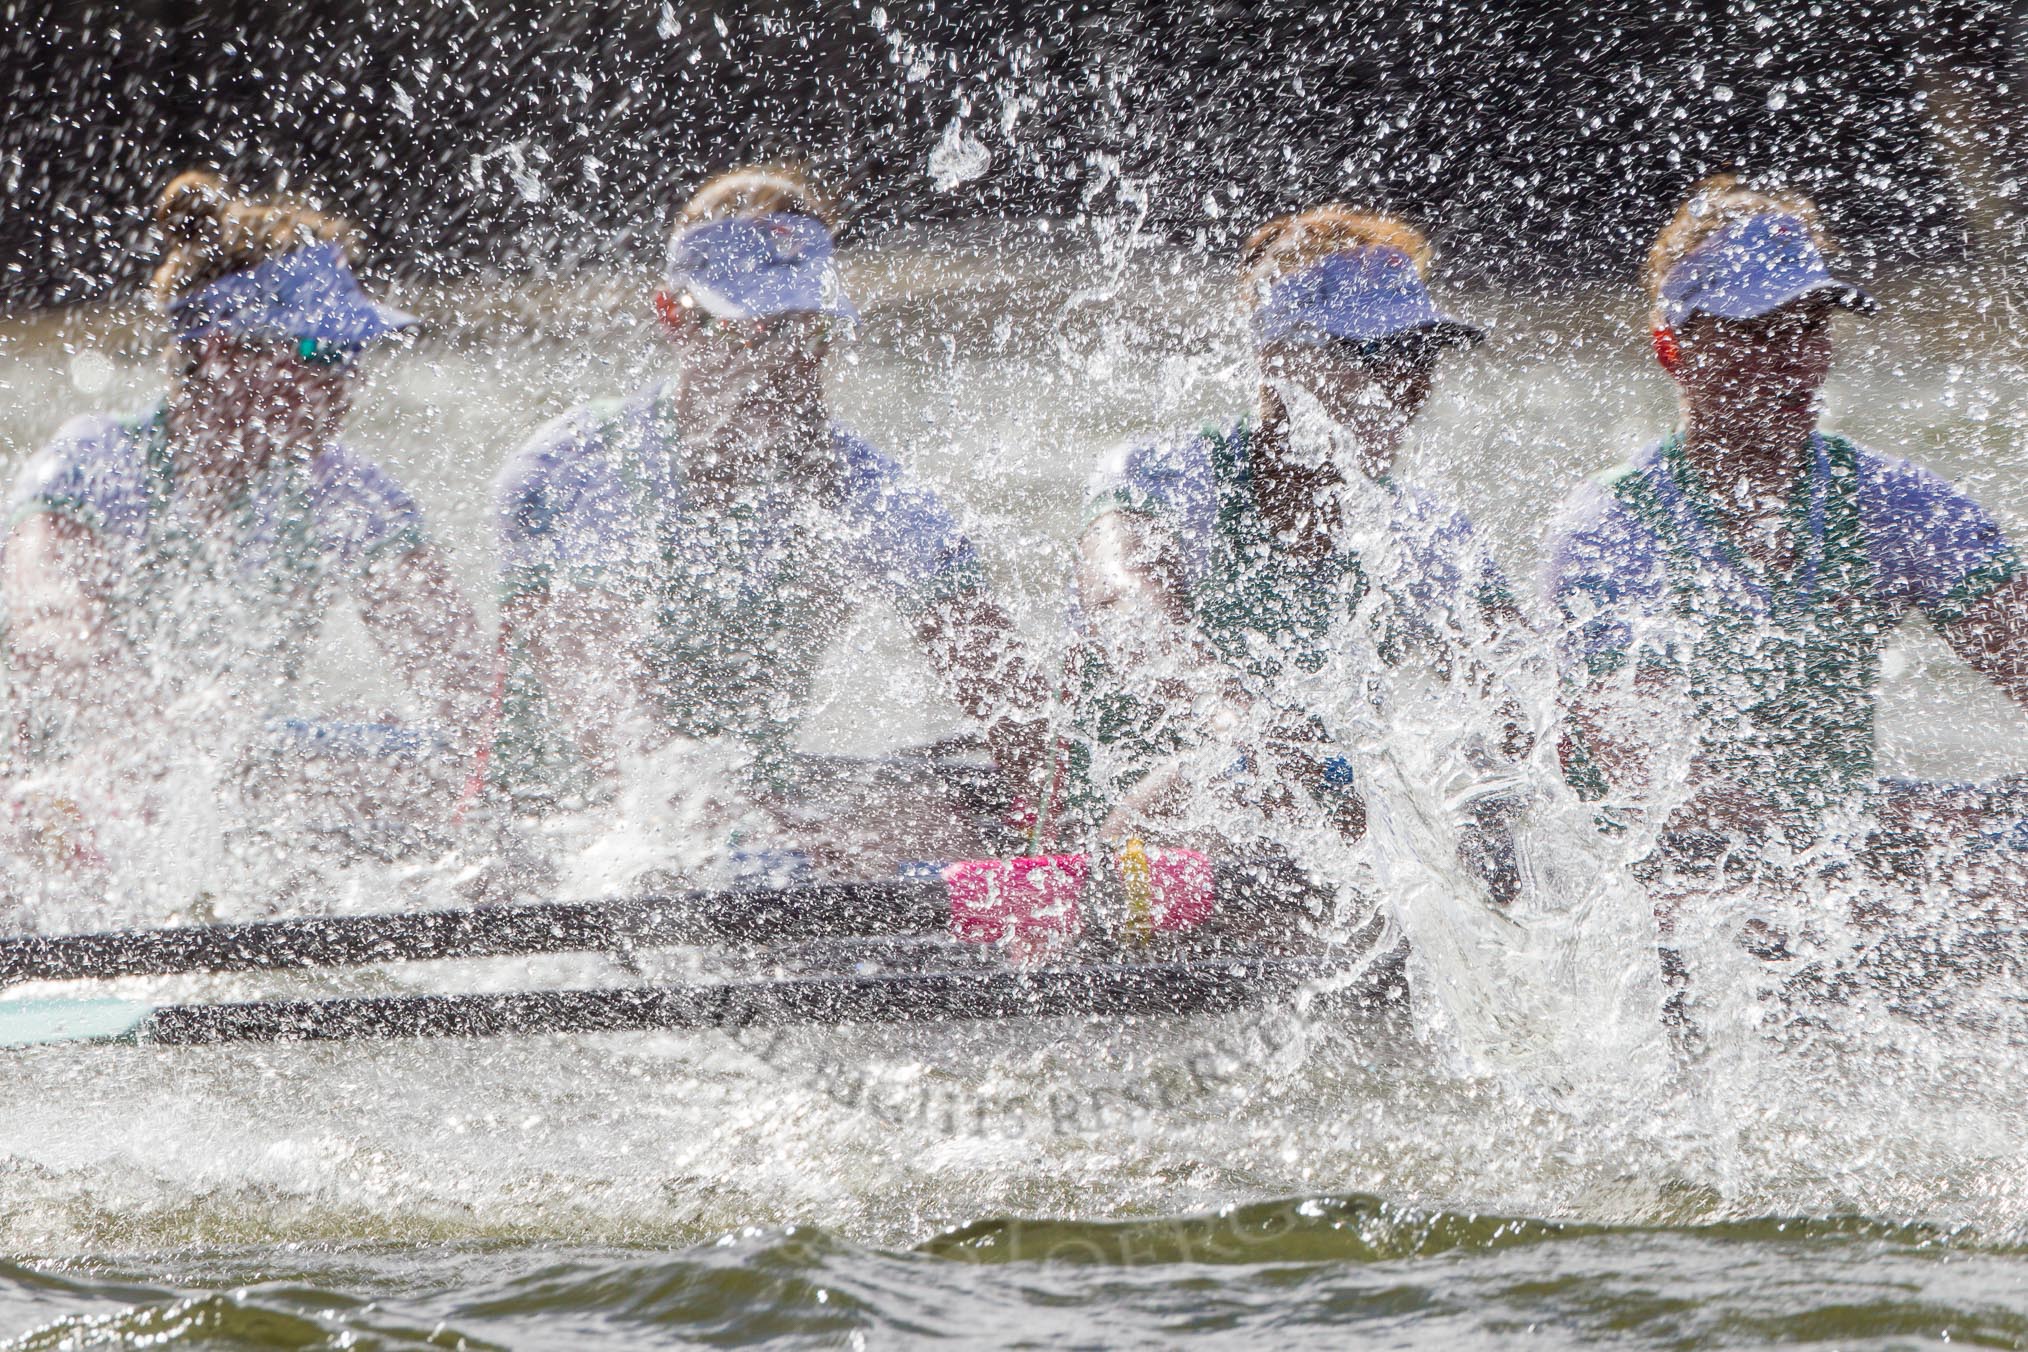 The Boat Race season 2016 -  The Cancer Research Women's Boat Race.
River Thames between Putney Bridge and Mortlake,
London SW15,

United Kingdom,
on 27 March 2016 at 14:22, image #268